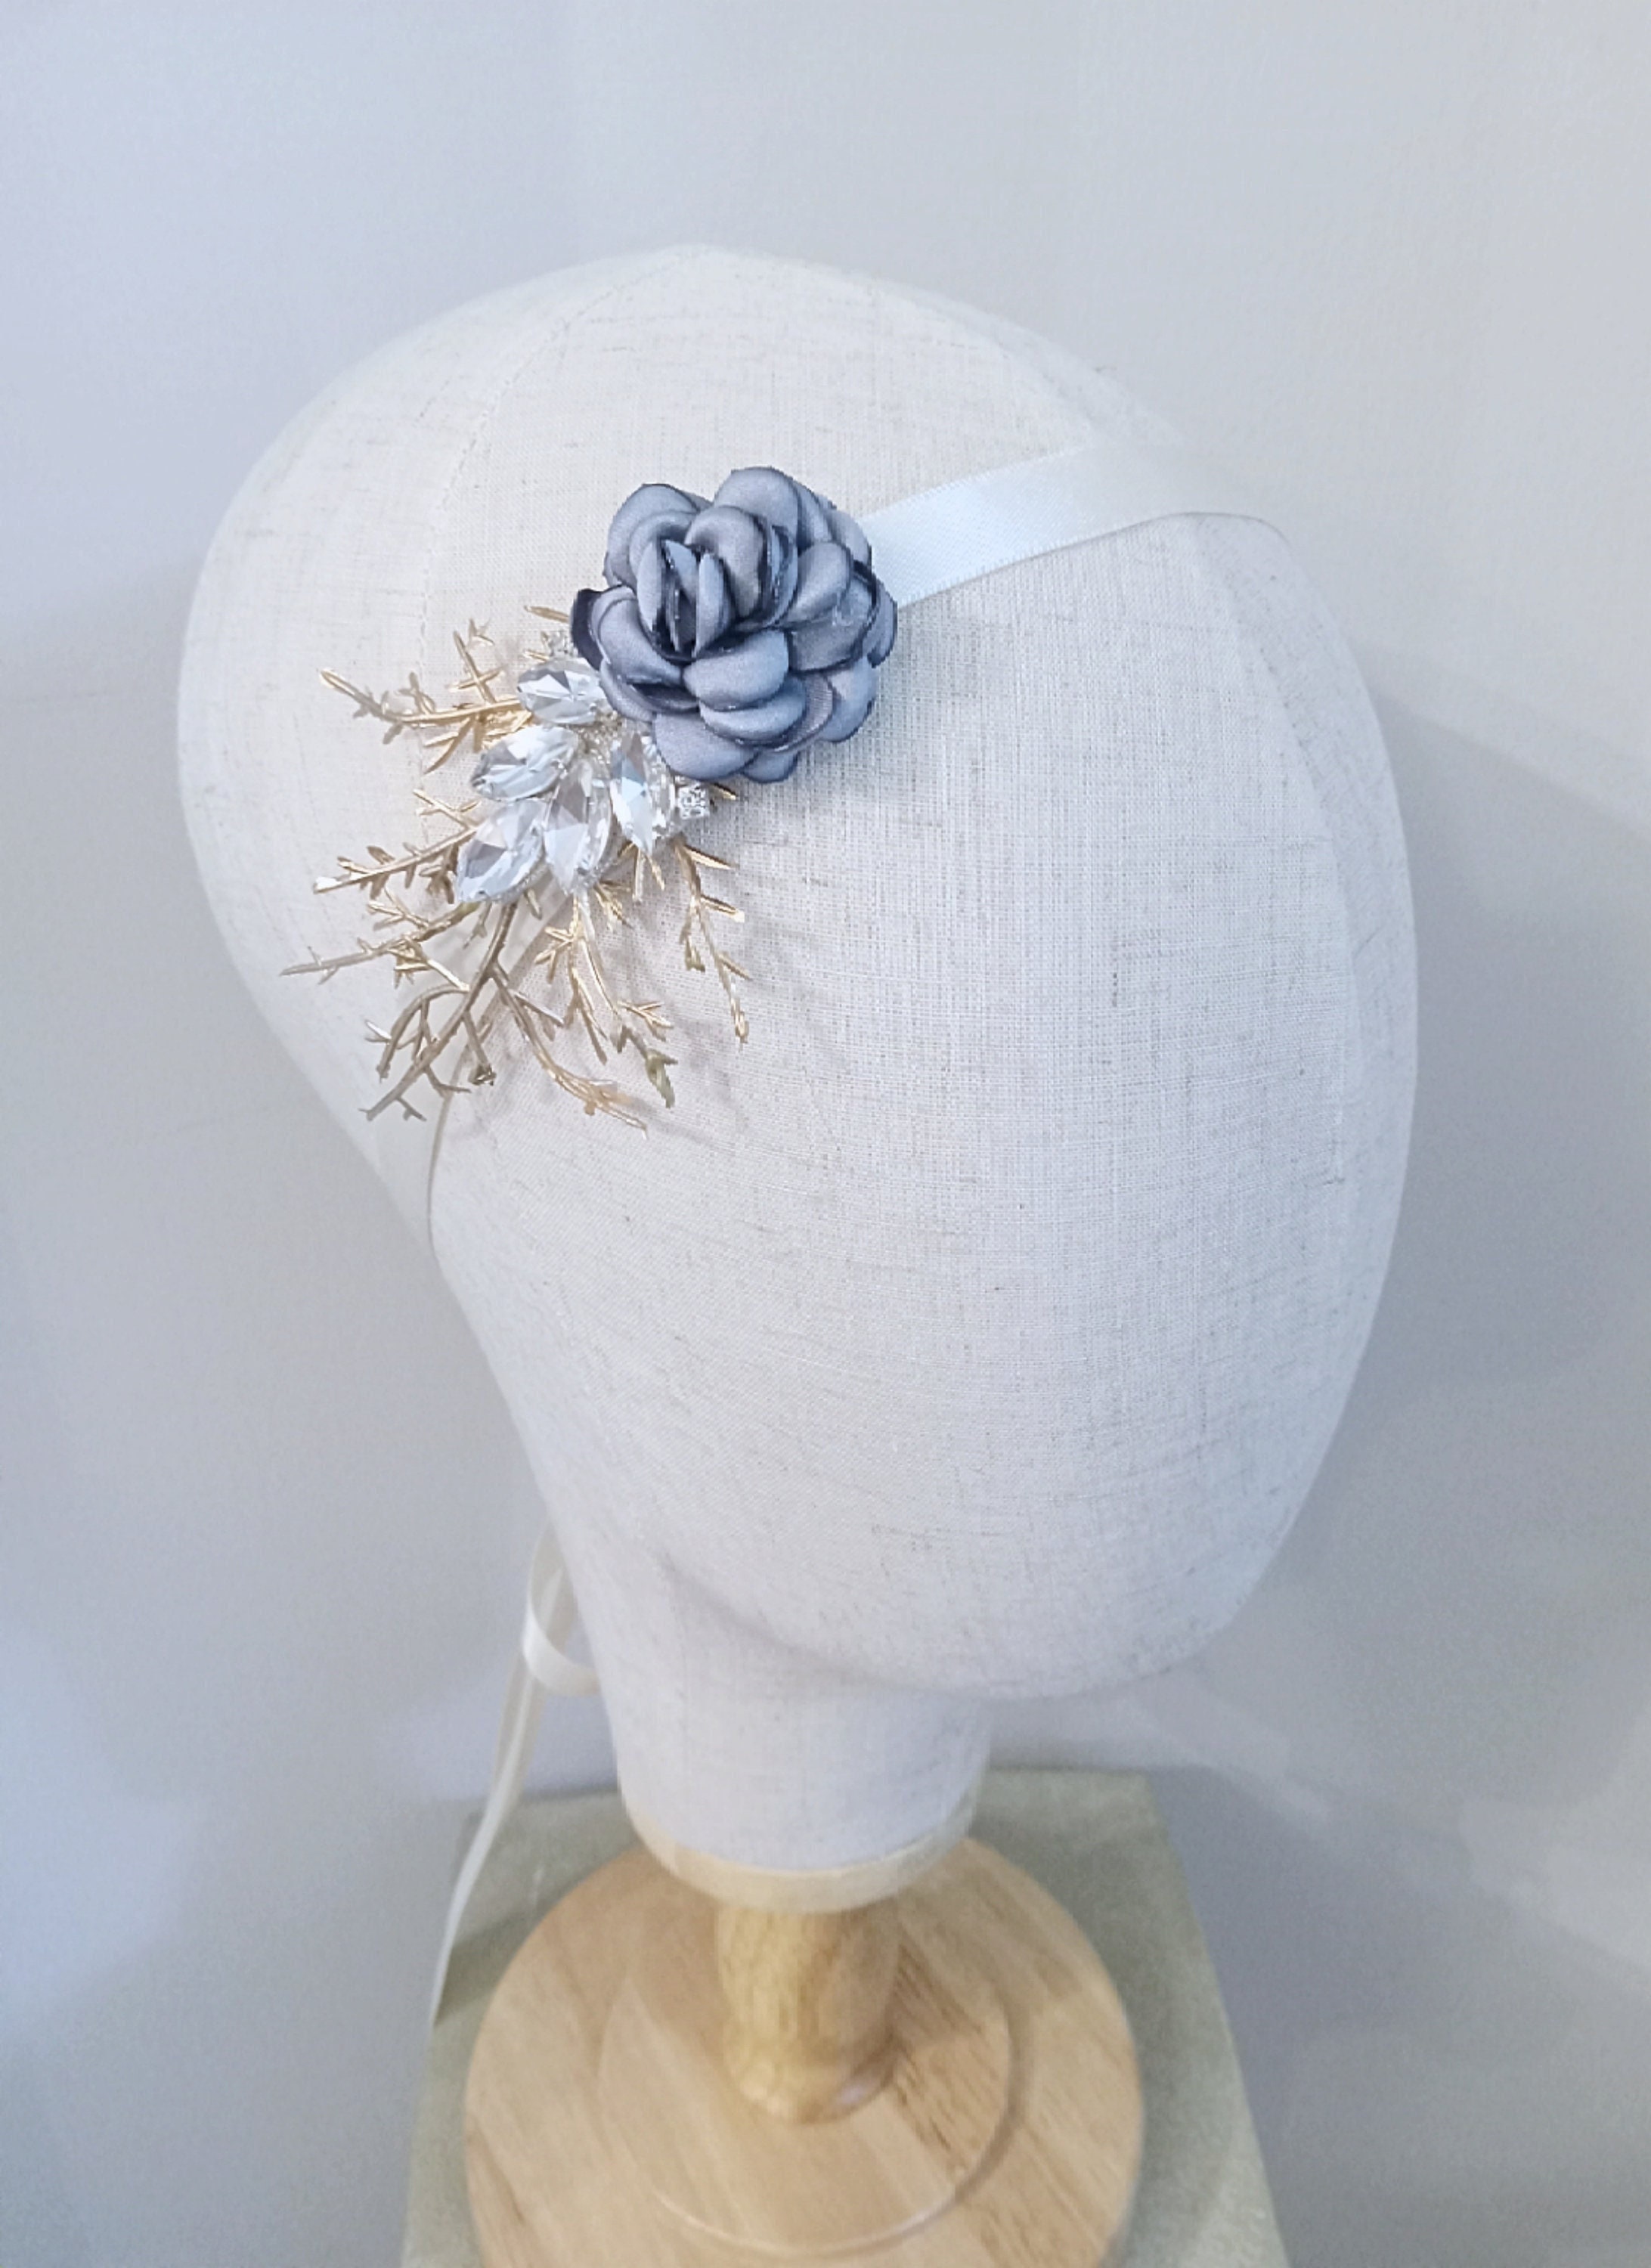 Blue Chiffon Ribbon Frayed Edge 1m Lengths for Wedding Bouquet, Blue Grey  Ideal for Invitations, Flat Lay, Wedding Styling, Gift Wrapping 